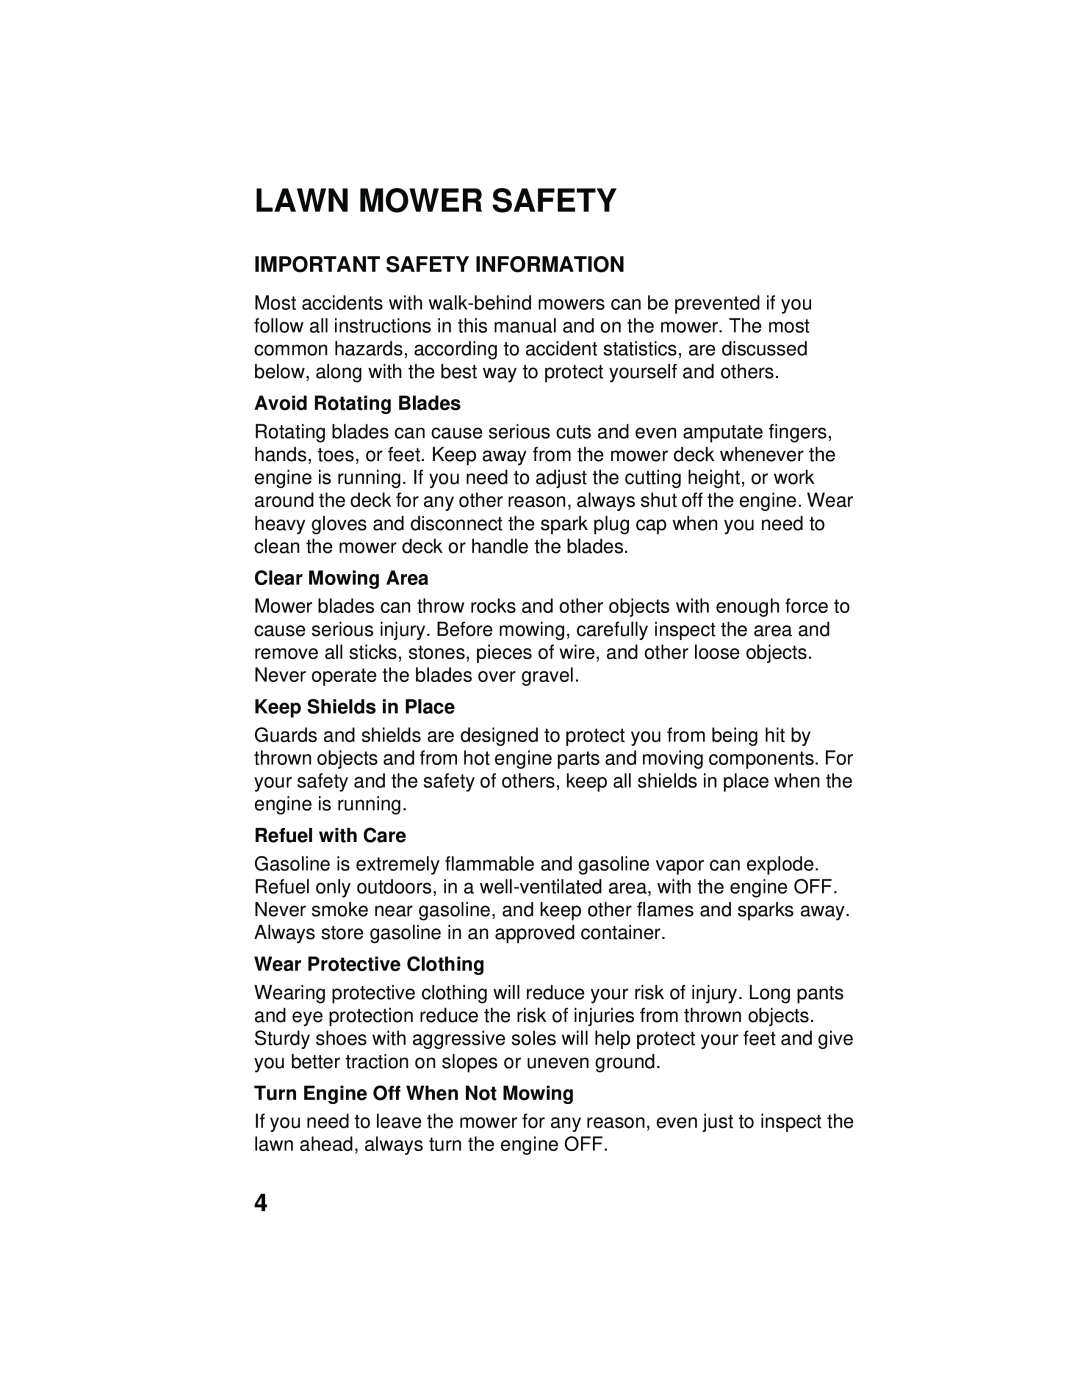 Honda Power Equipment HRB216TXA Lawn Mower Safety, Important Safety Information, Avoid Rotating Blades, Clear Mowing Area 